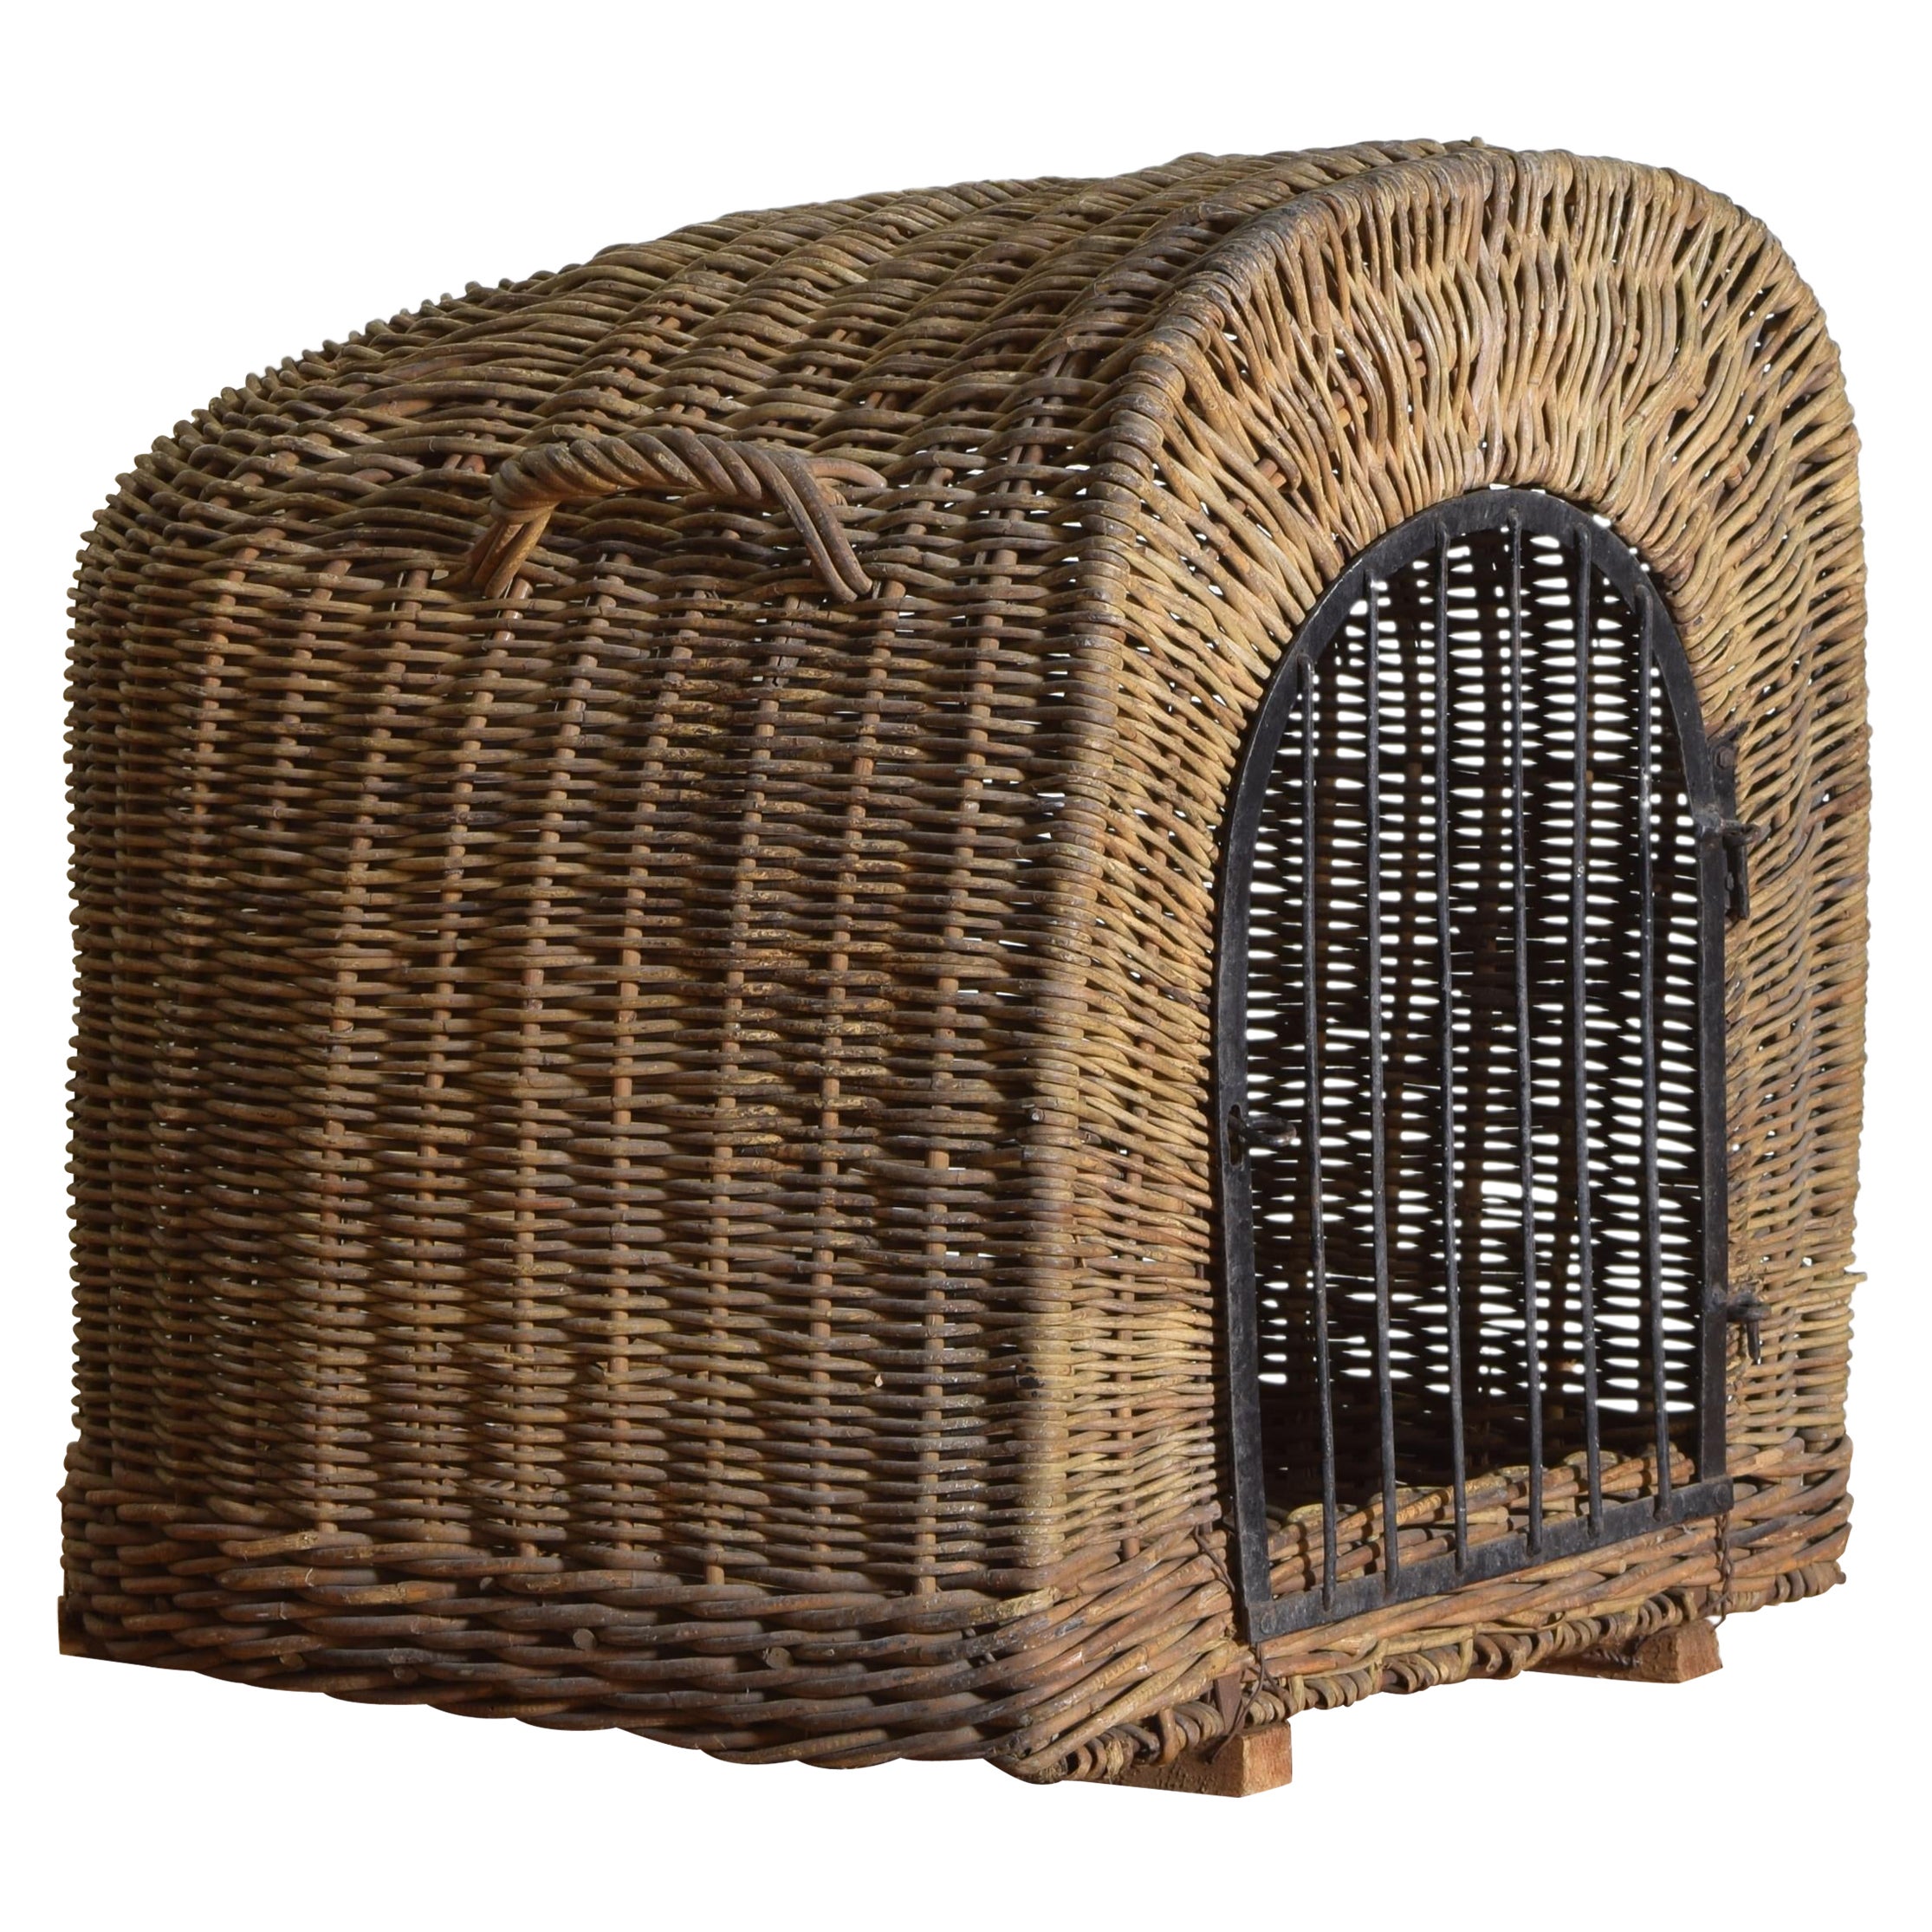 English Wicker Dog Kennel Crate For Sale